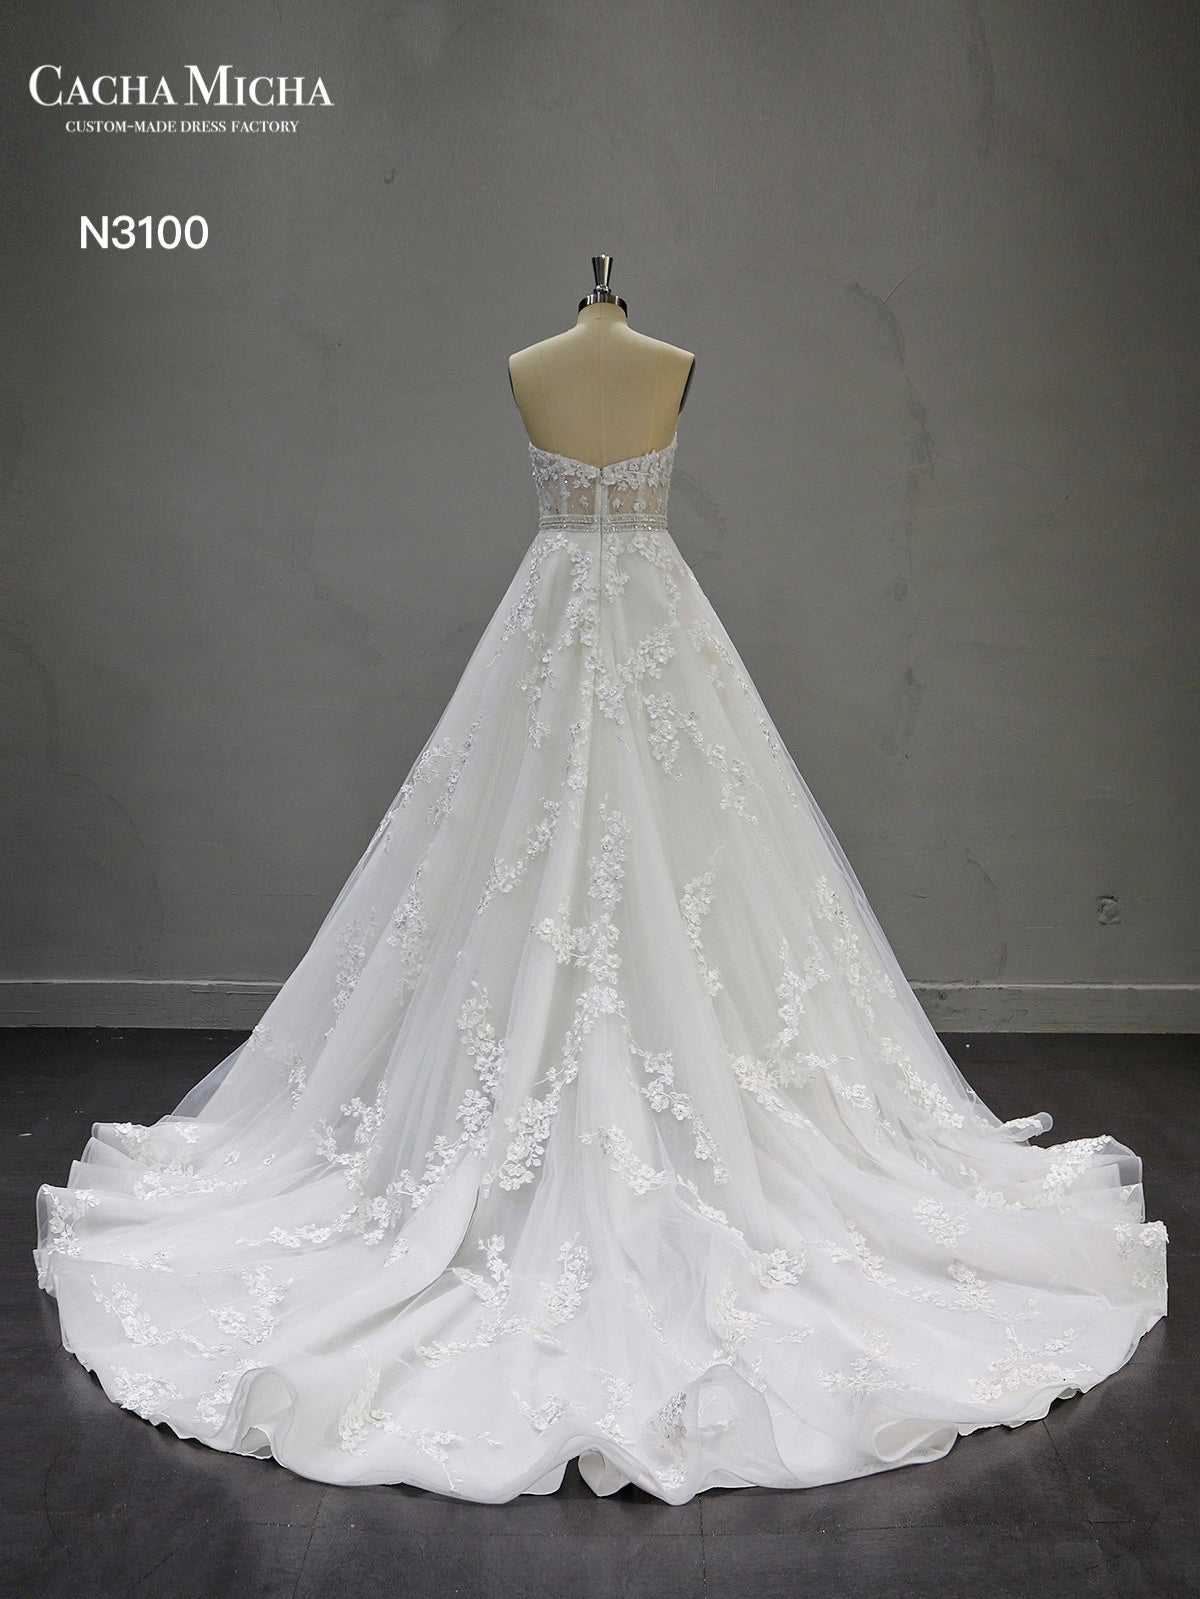 Hand Beaded Lace Ball Gown Wedding Dress N3100